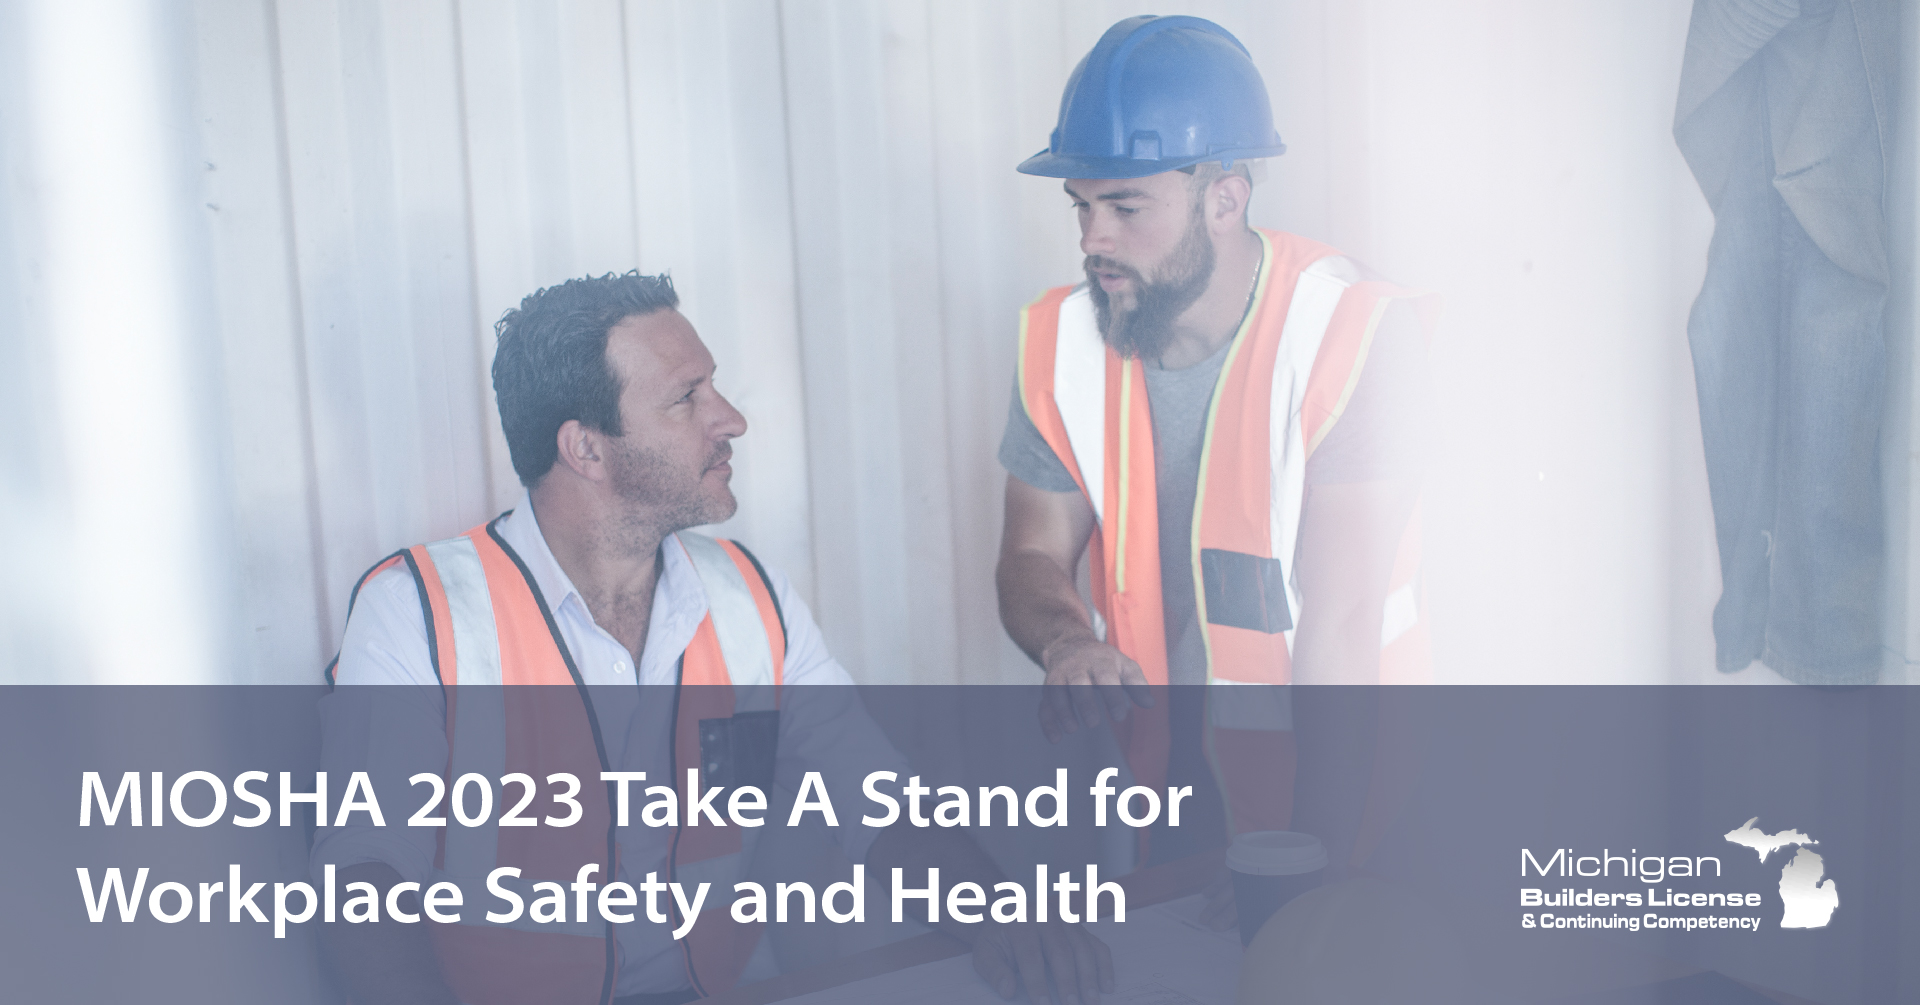 MIOSHA 2023 Take A Stand for Workplace Safety and Health